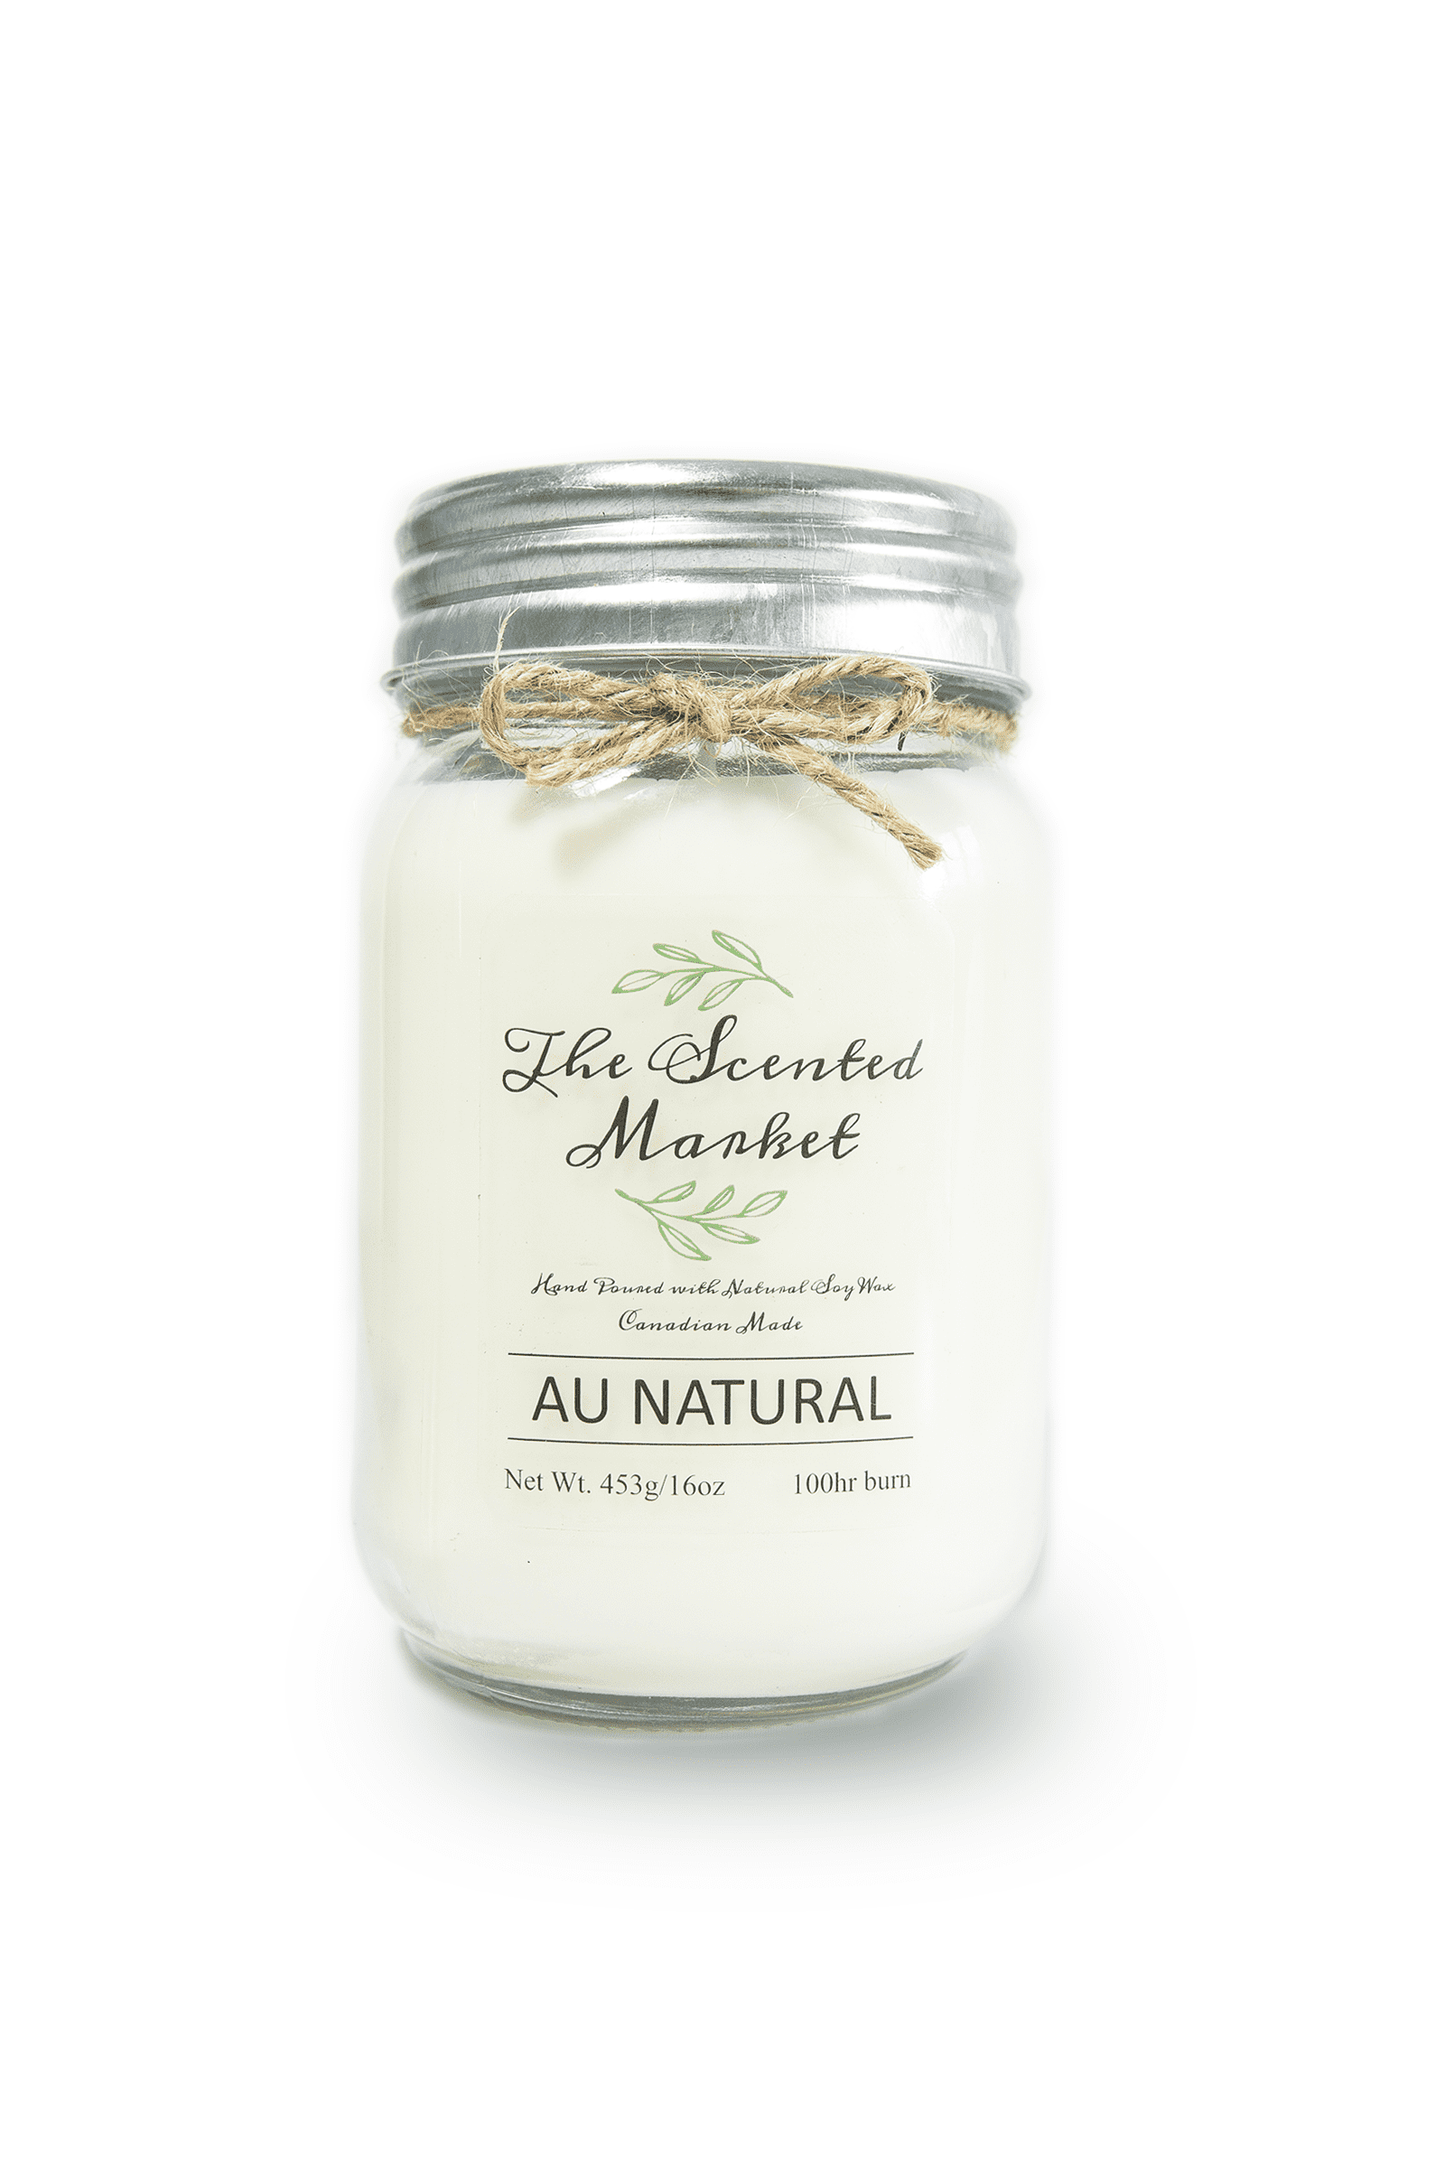 Au Natural is our scent free soy 16 oz candle